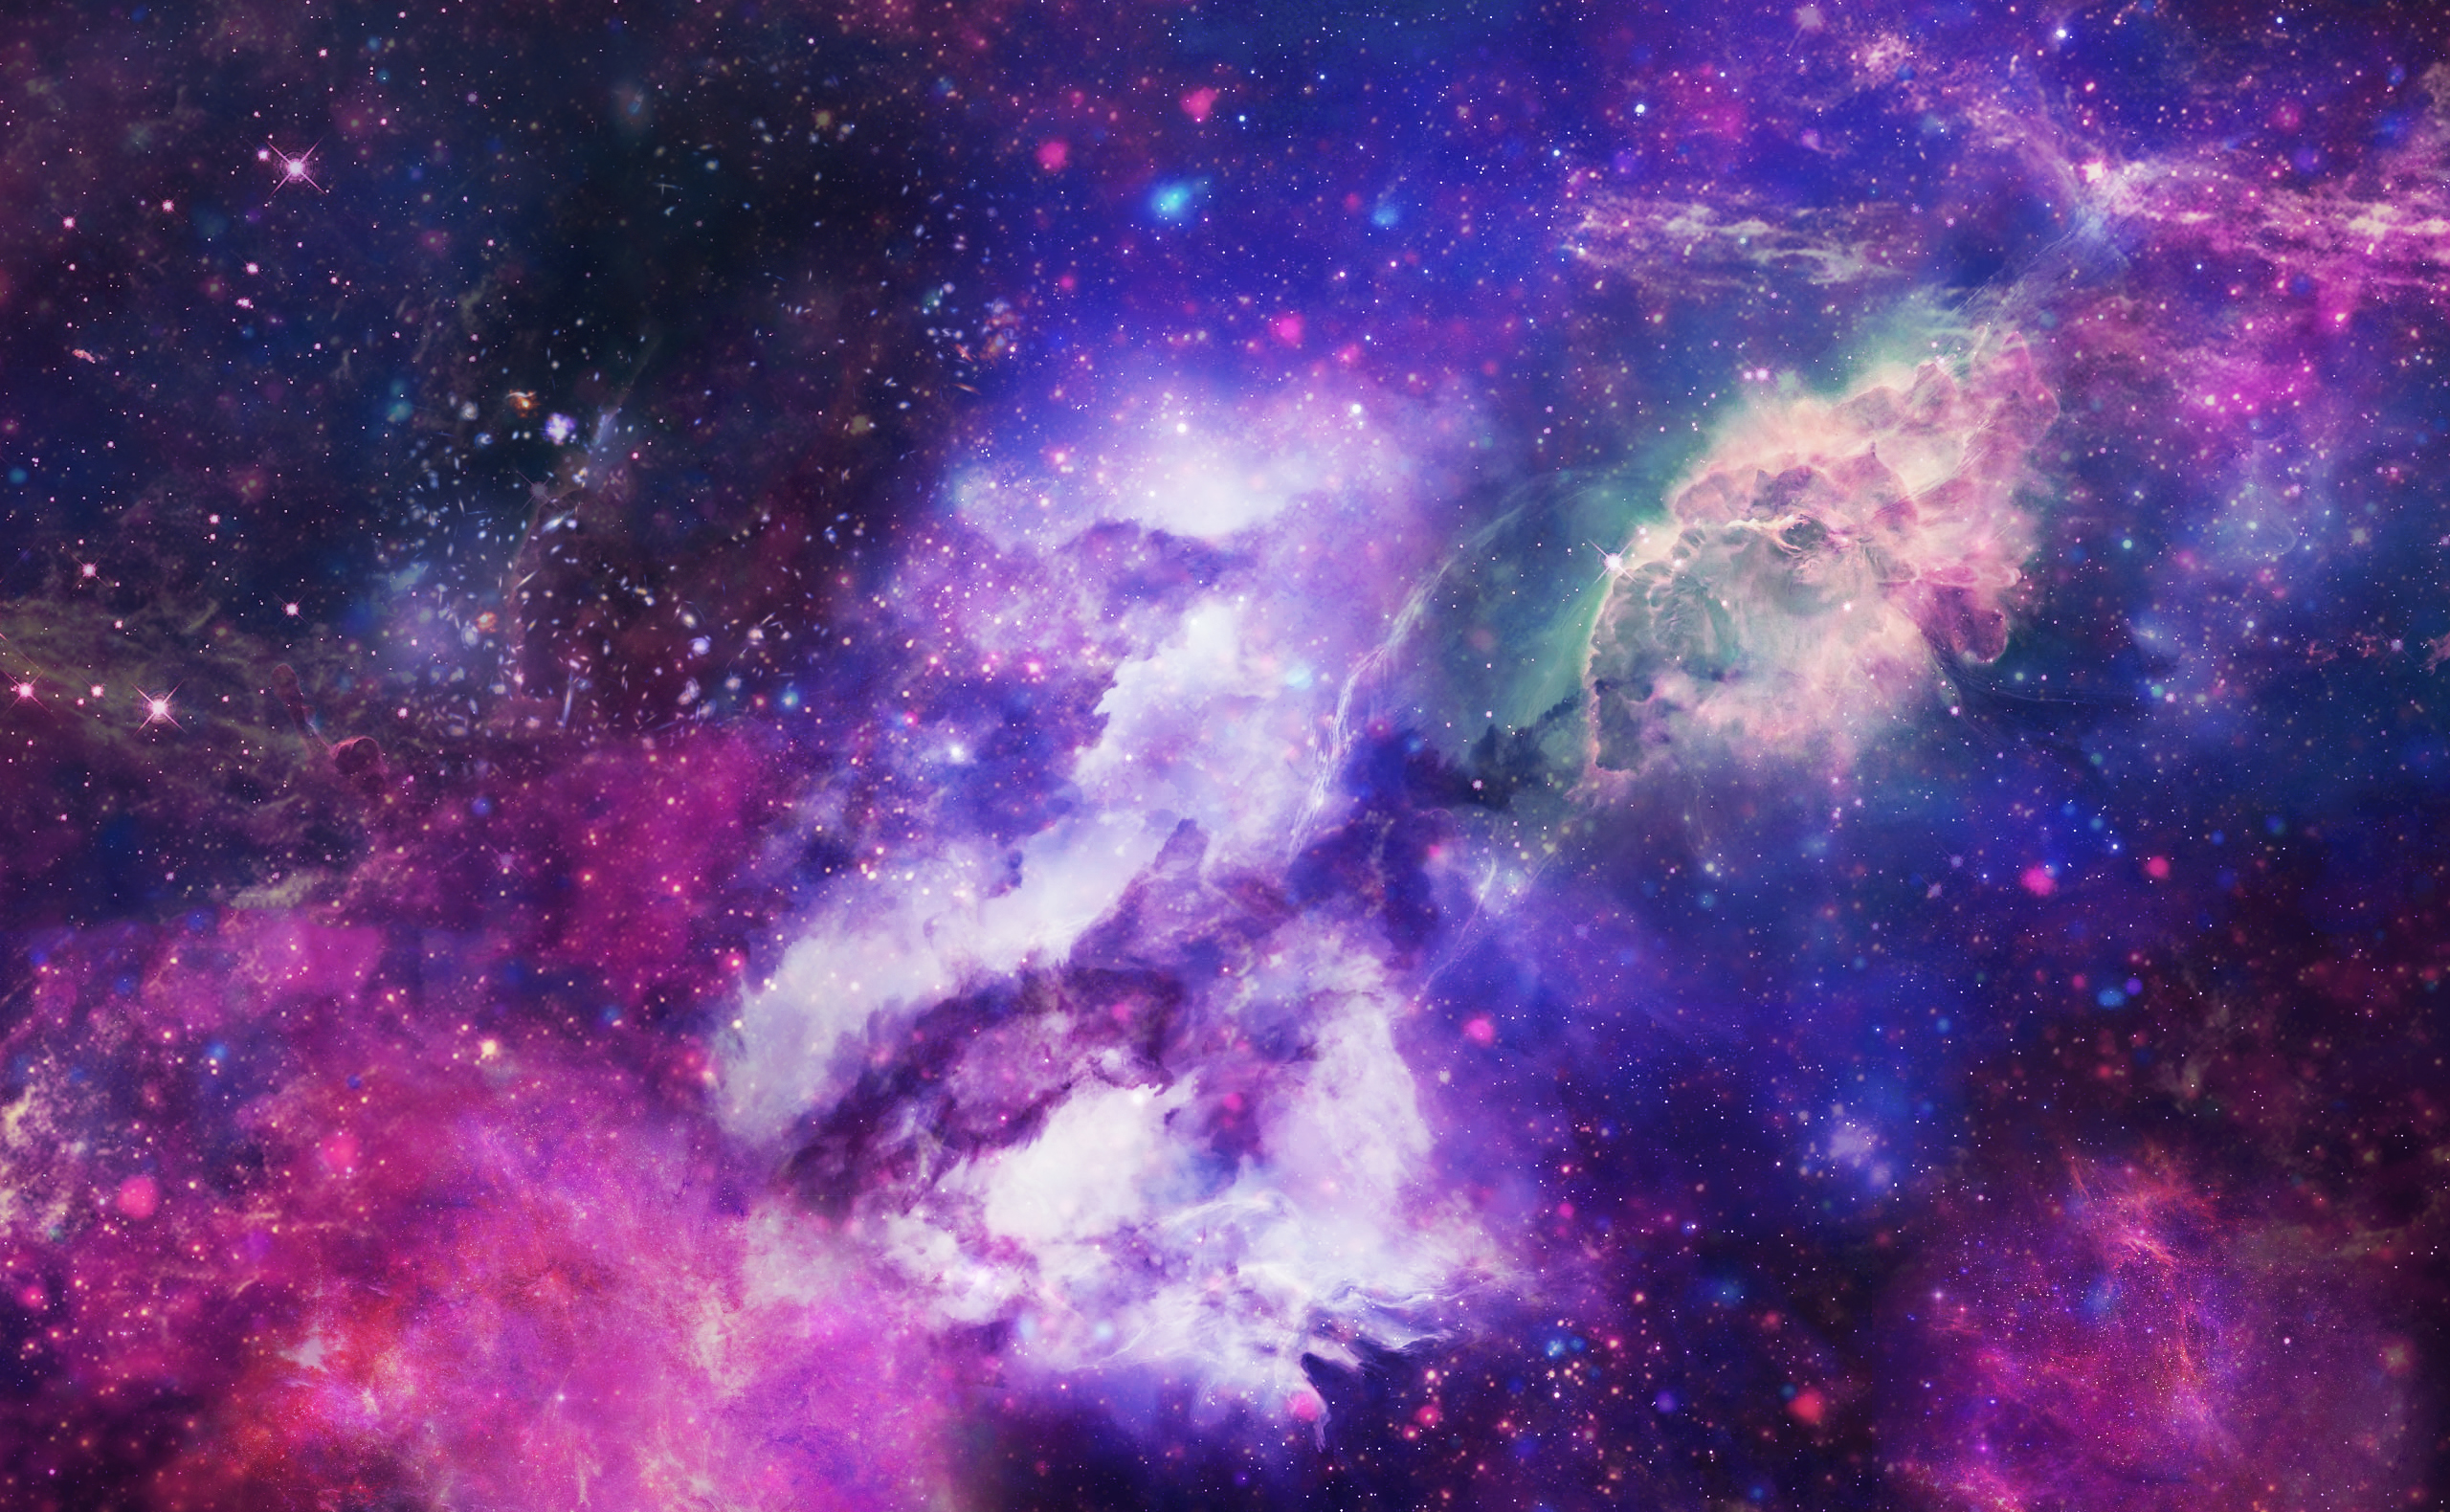 High Quality Image Of Space › Px - Galaxy Texture - HD Wallpaper 